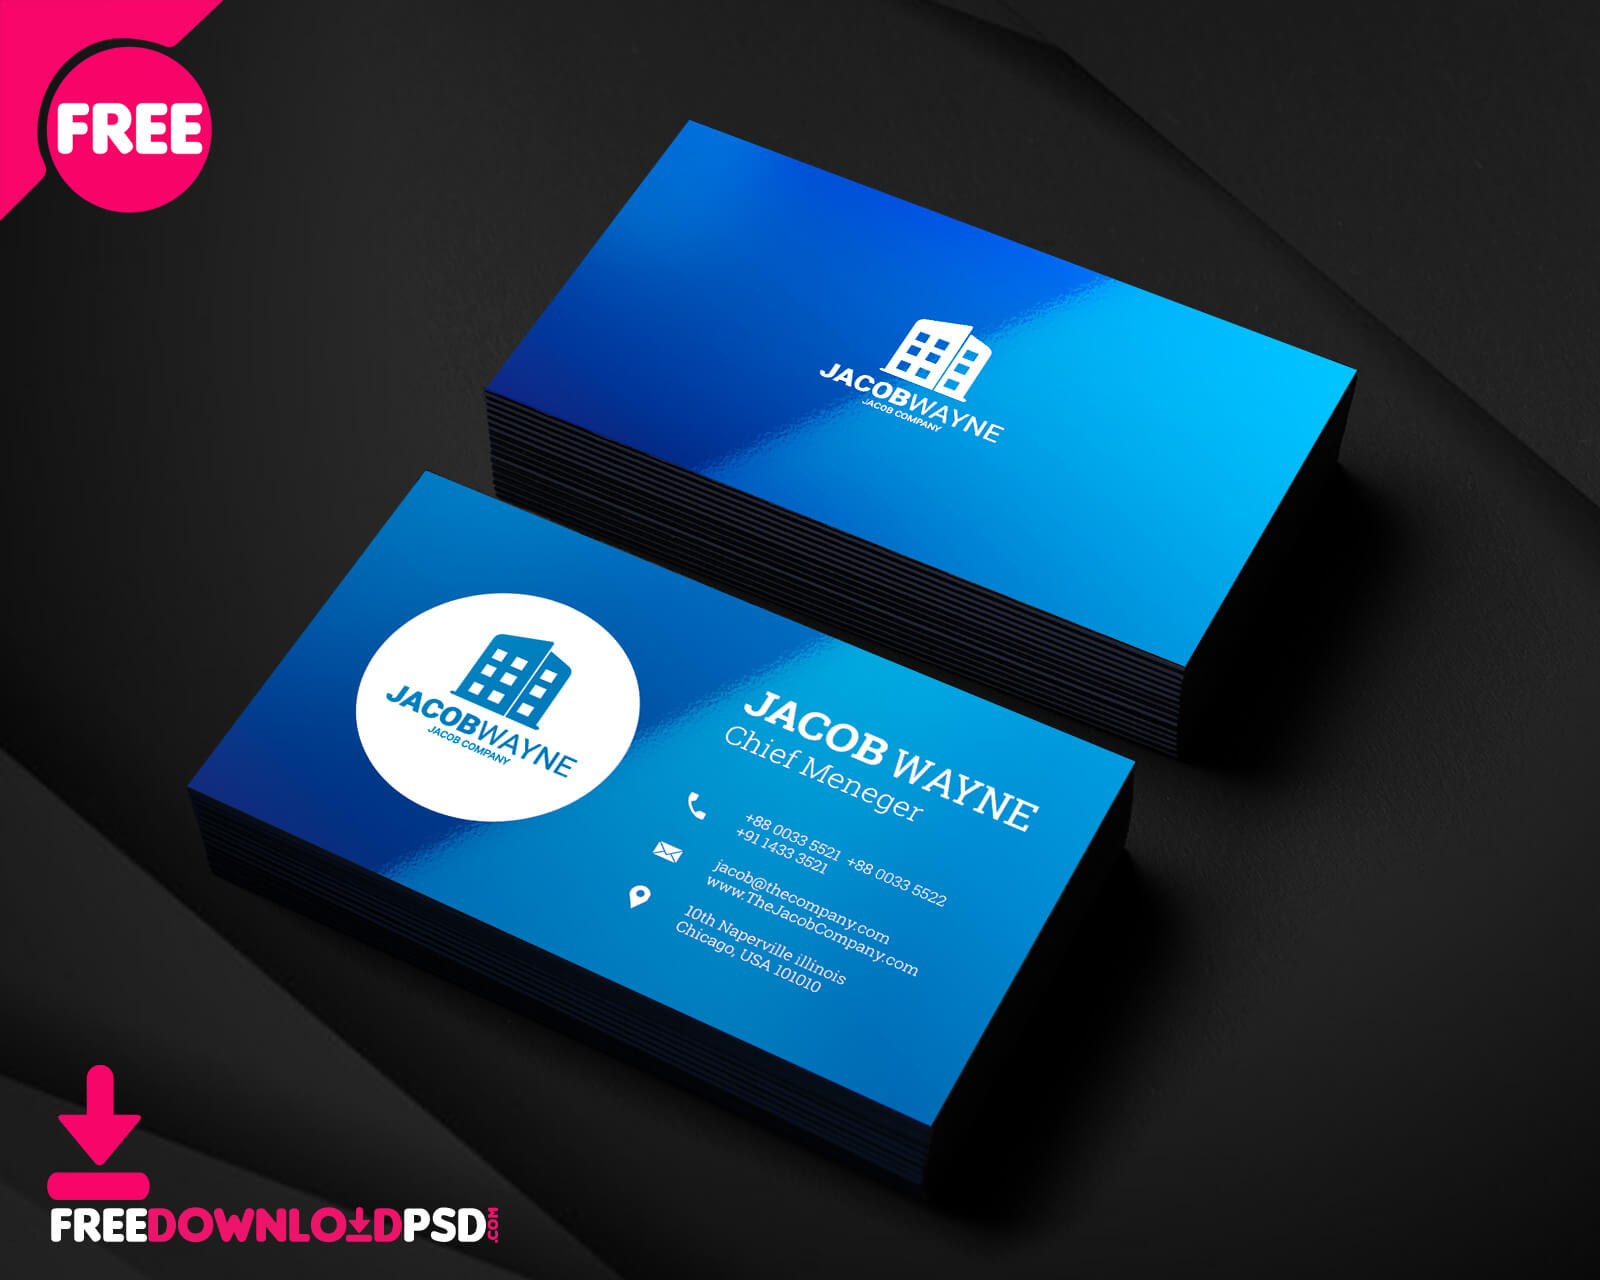 Real Estate Business Card Psd | Freedownloadpsd Within Business Card Template Photoshop Cs6